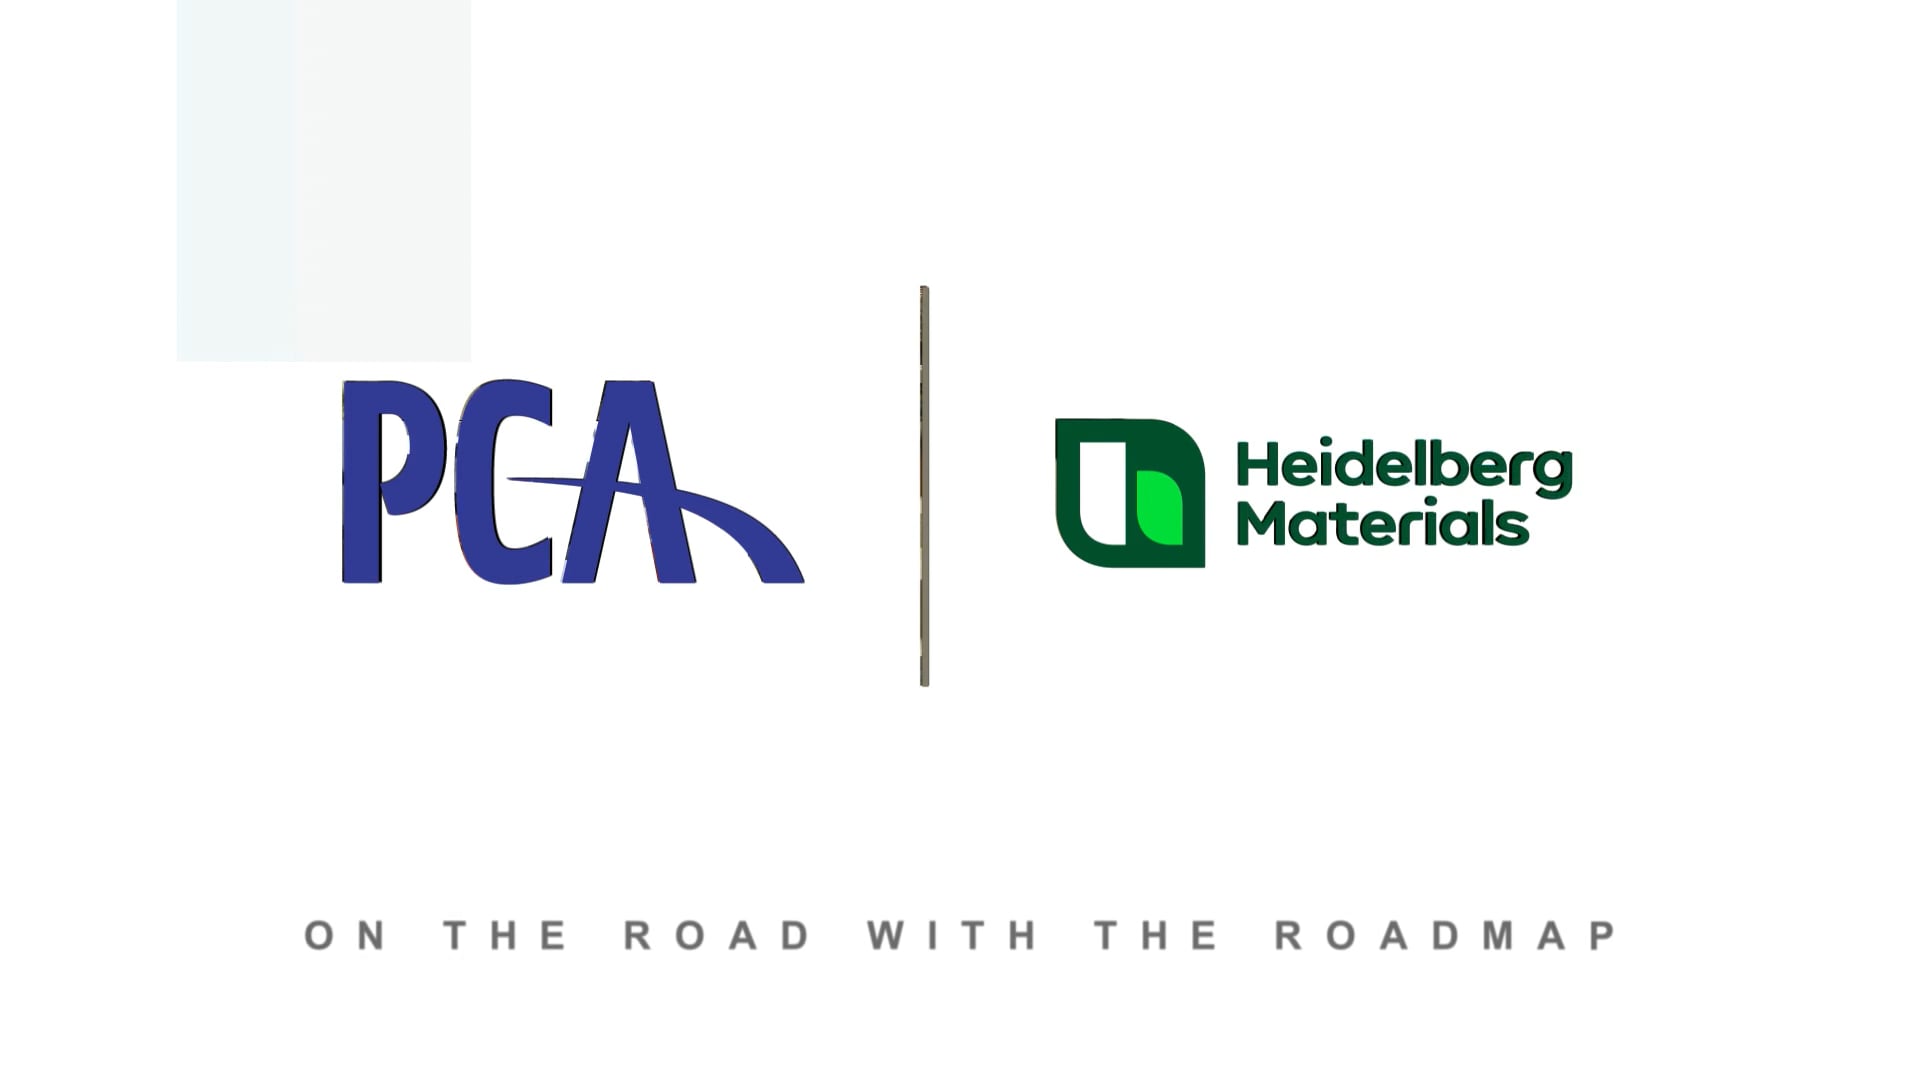 Chris Ward of Heidelberg Materials NA – On the Road with the Roadmap